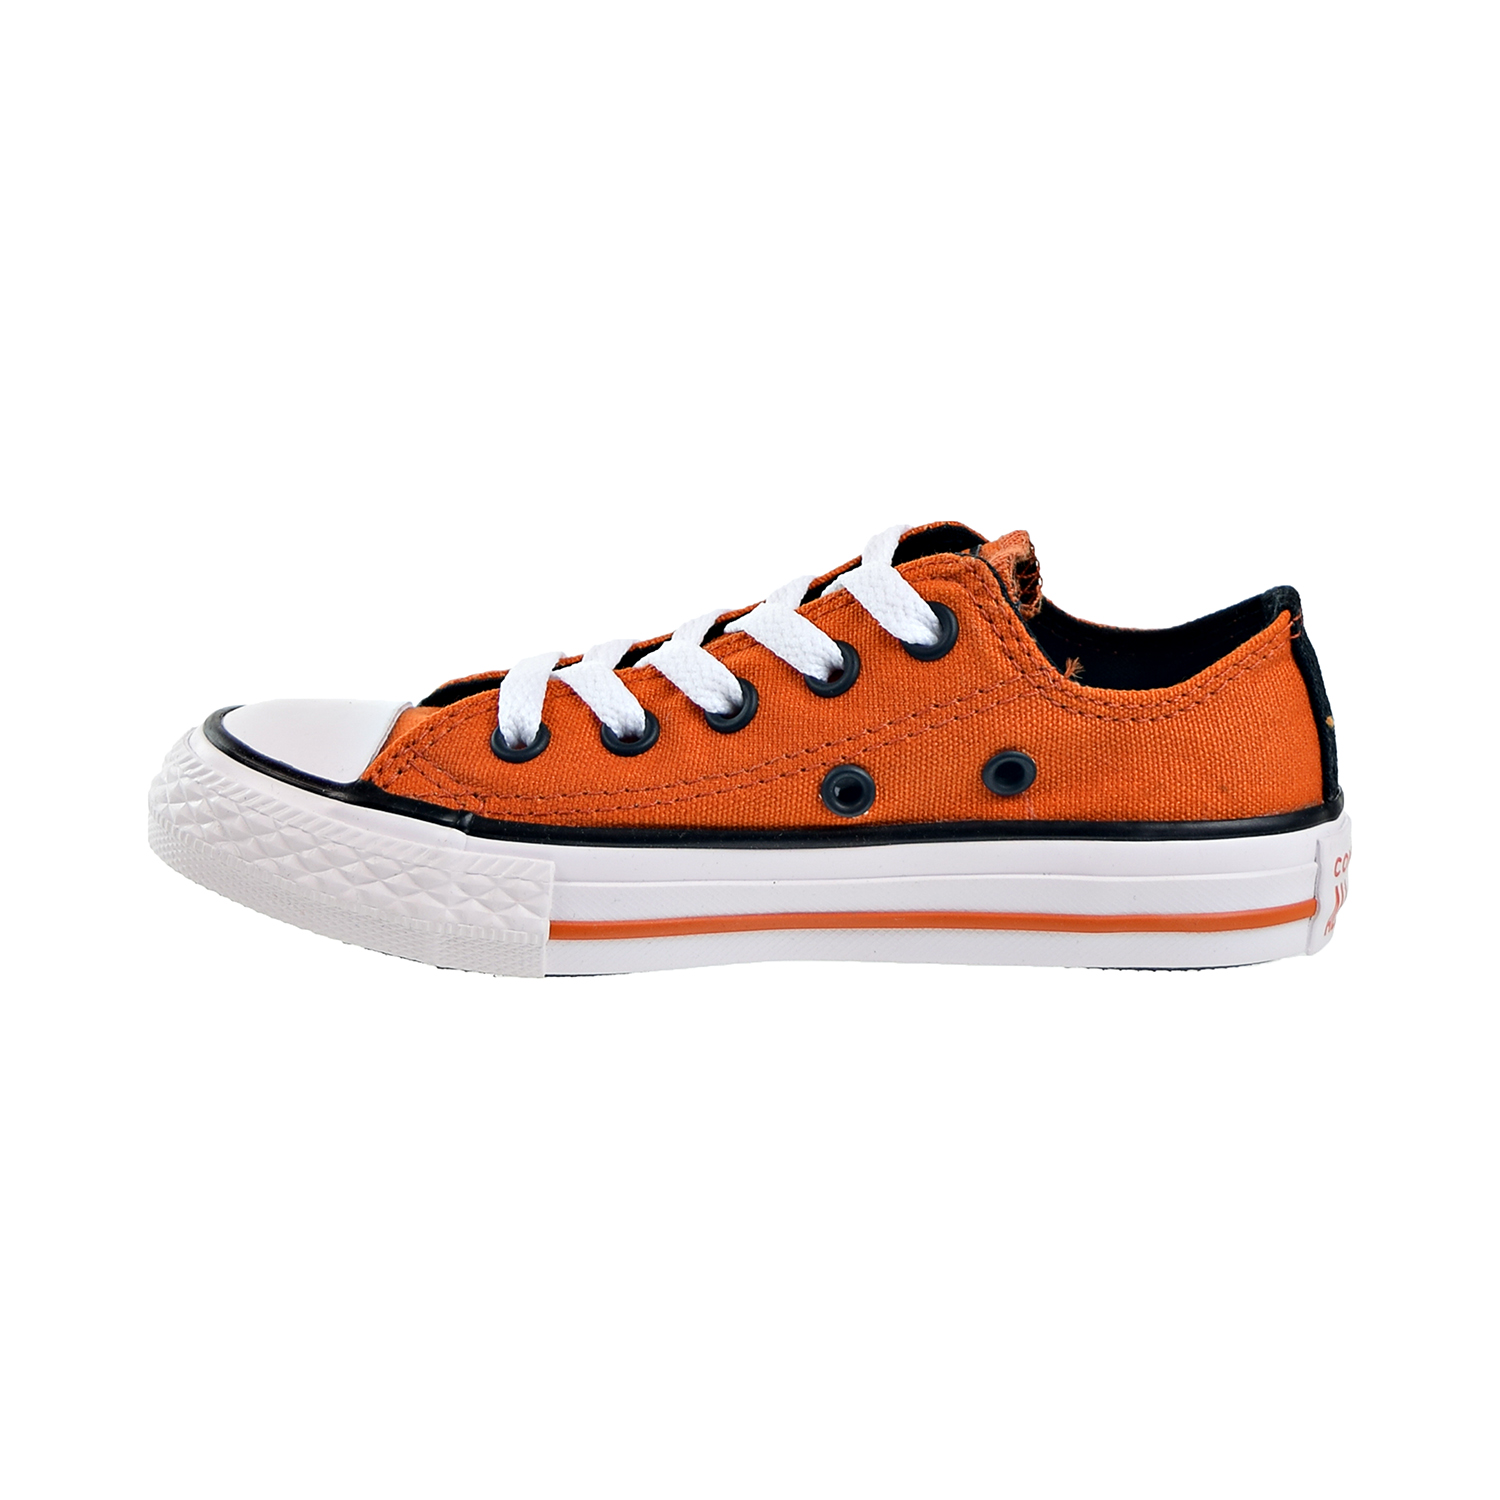 Converse Chuck Taylor All Star Ox Big Kids Shoes Campfire Orange-Black-White 661864f - image 4 of 6